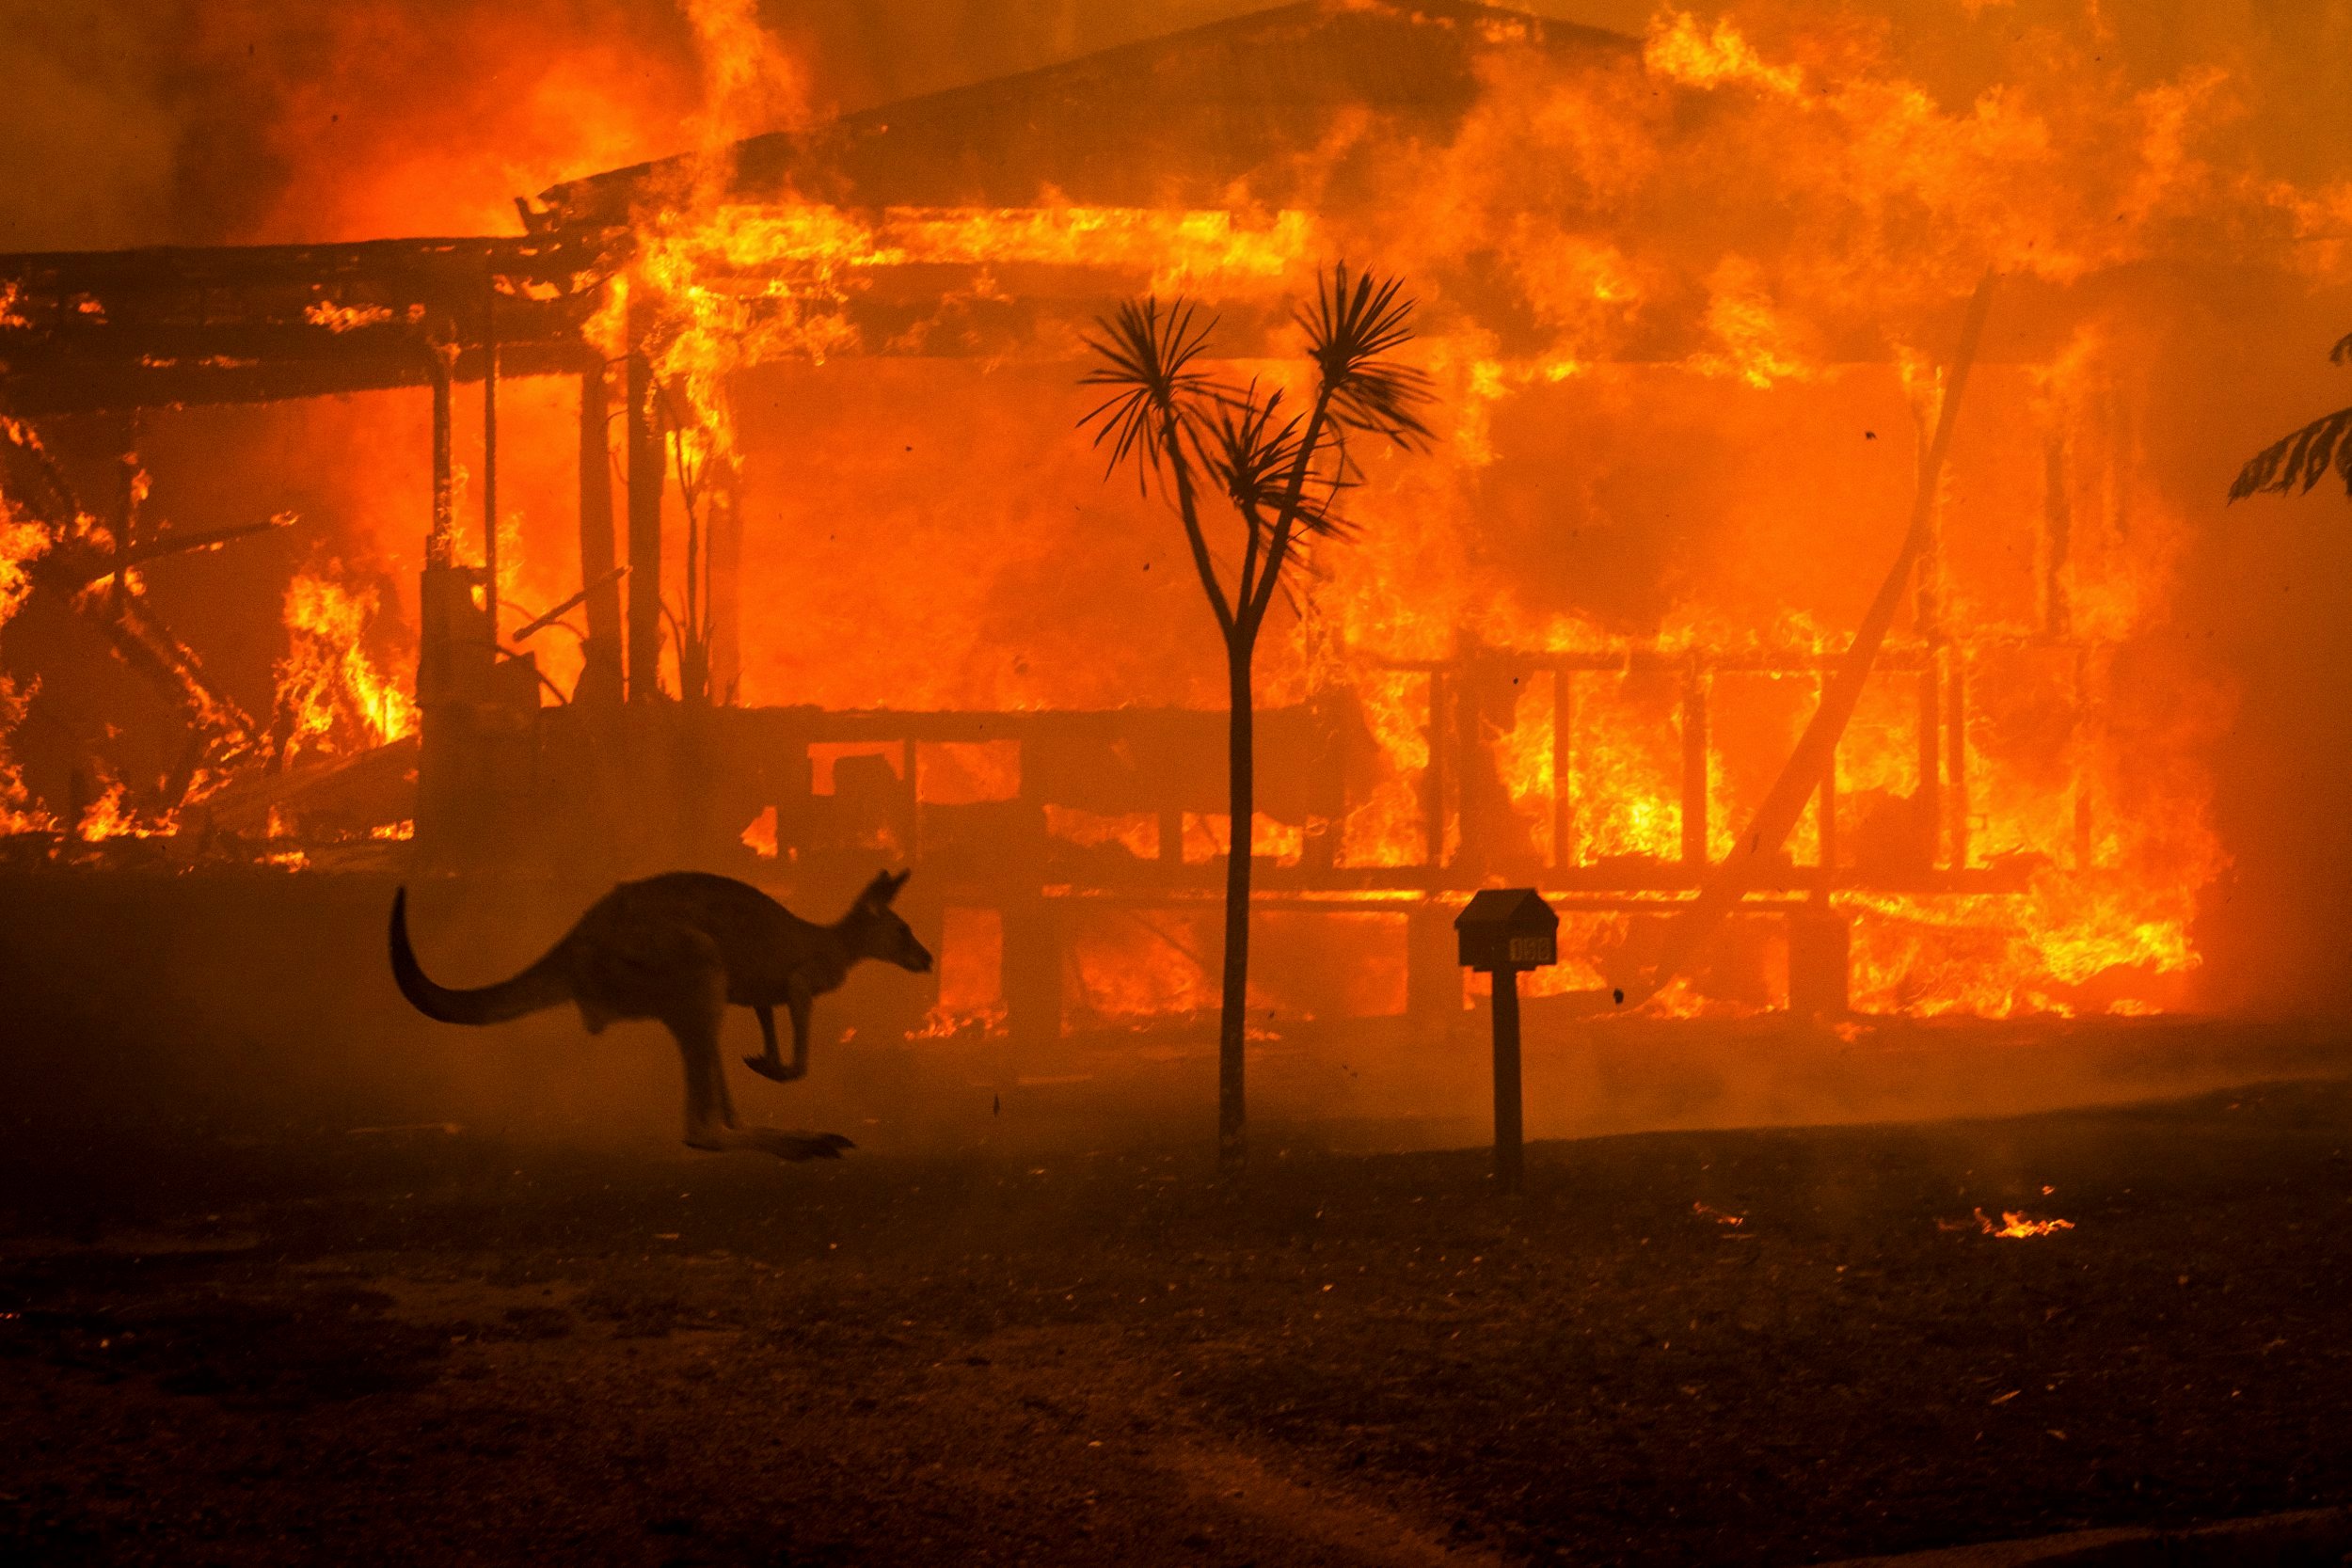 Millions of animals are dying from the Australian fires, and the environment will suffer for years to come